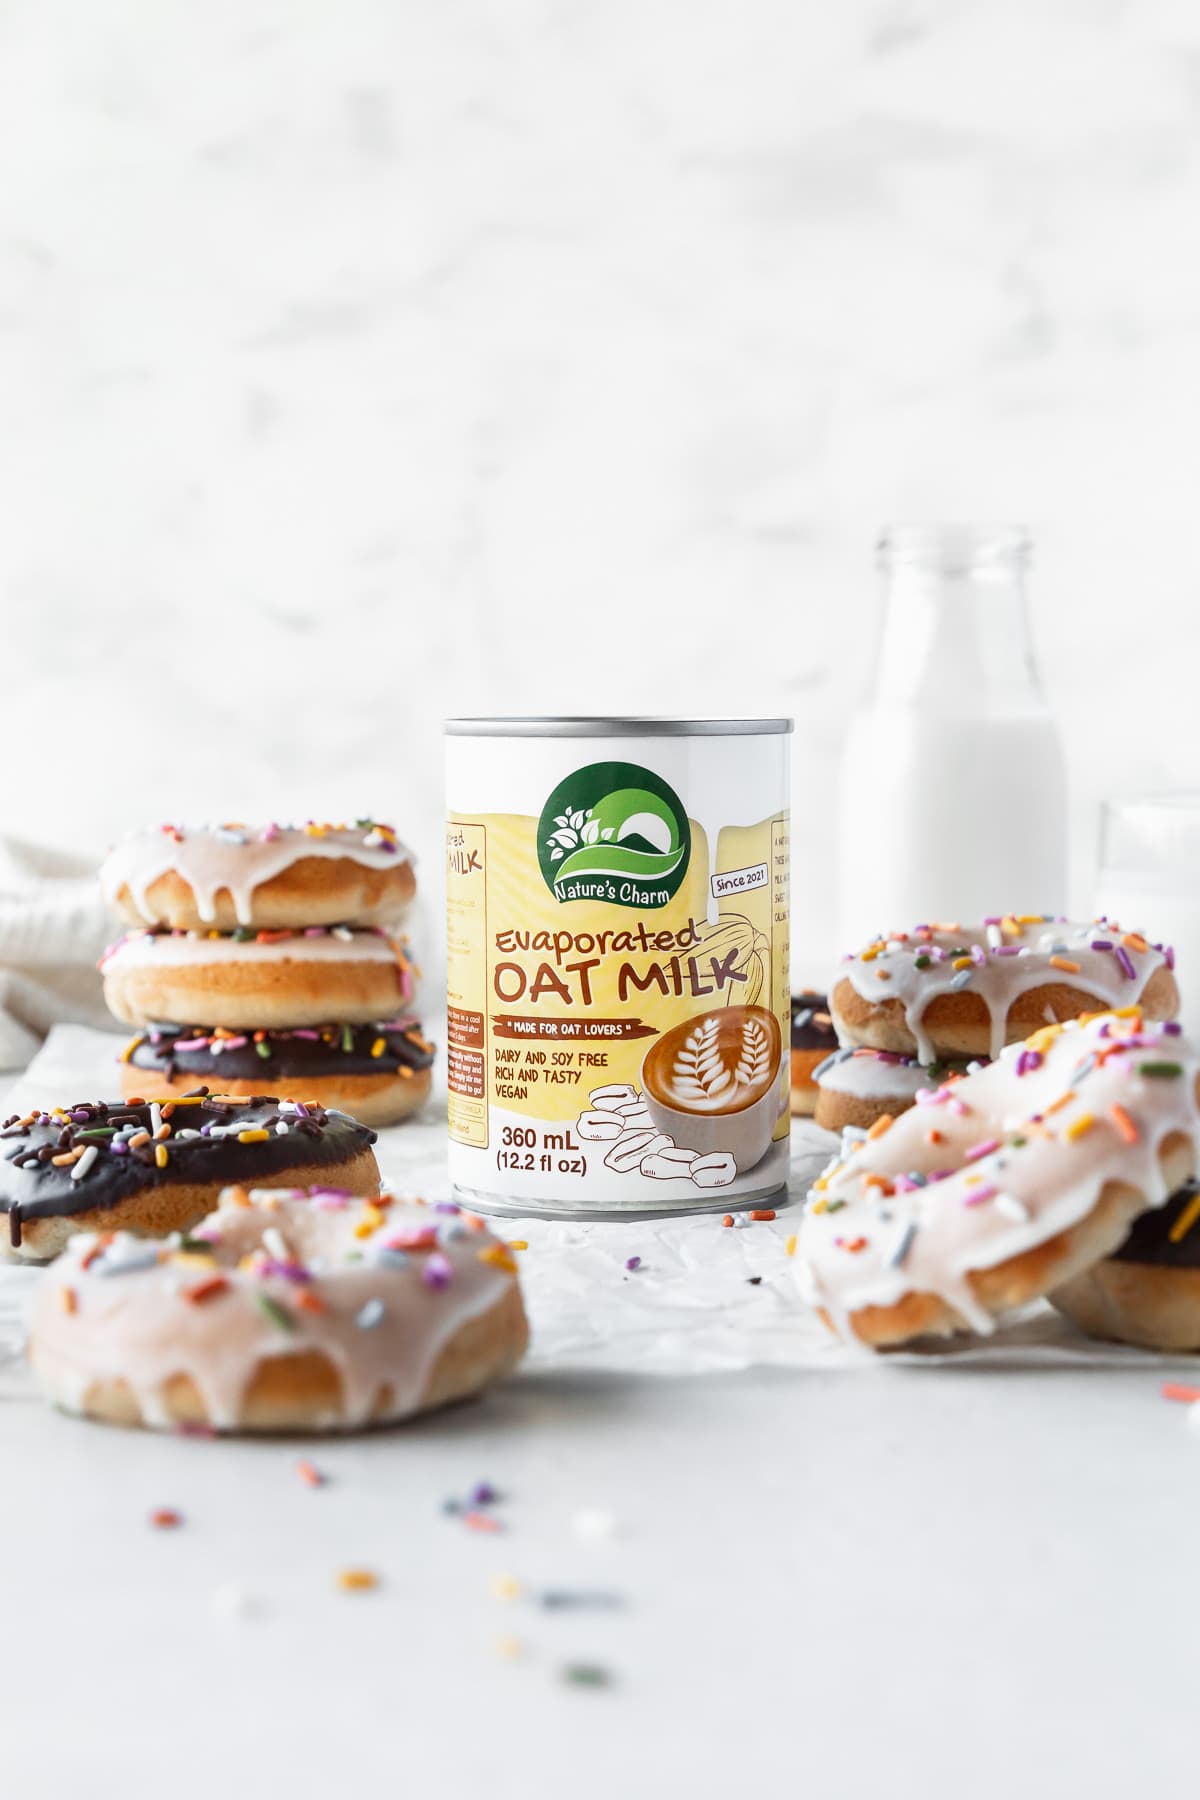 Can of Nature's Charm evaporated oat milk in the center of a table with vegan dairy-free donuts all around.